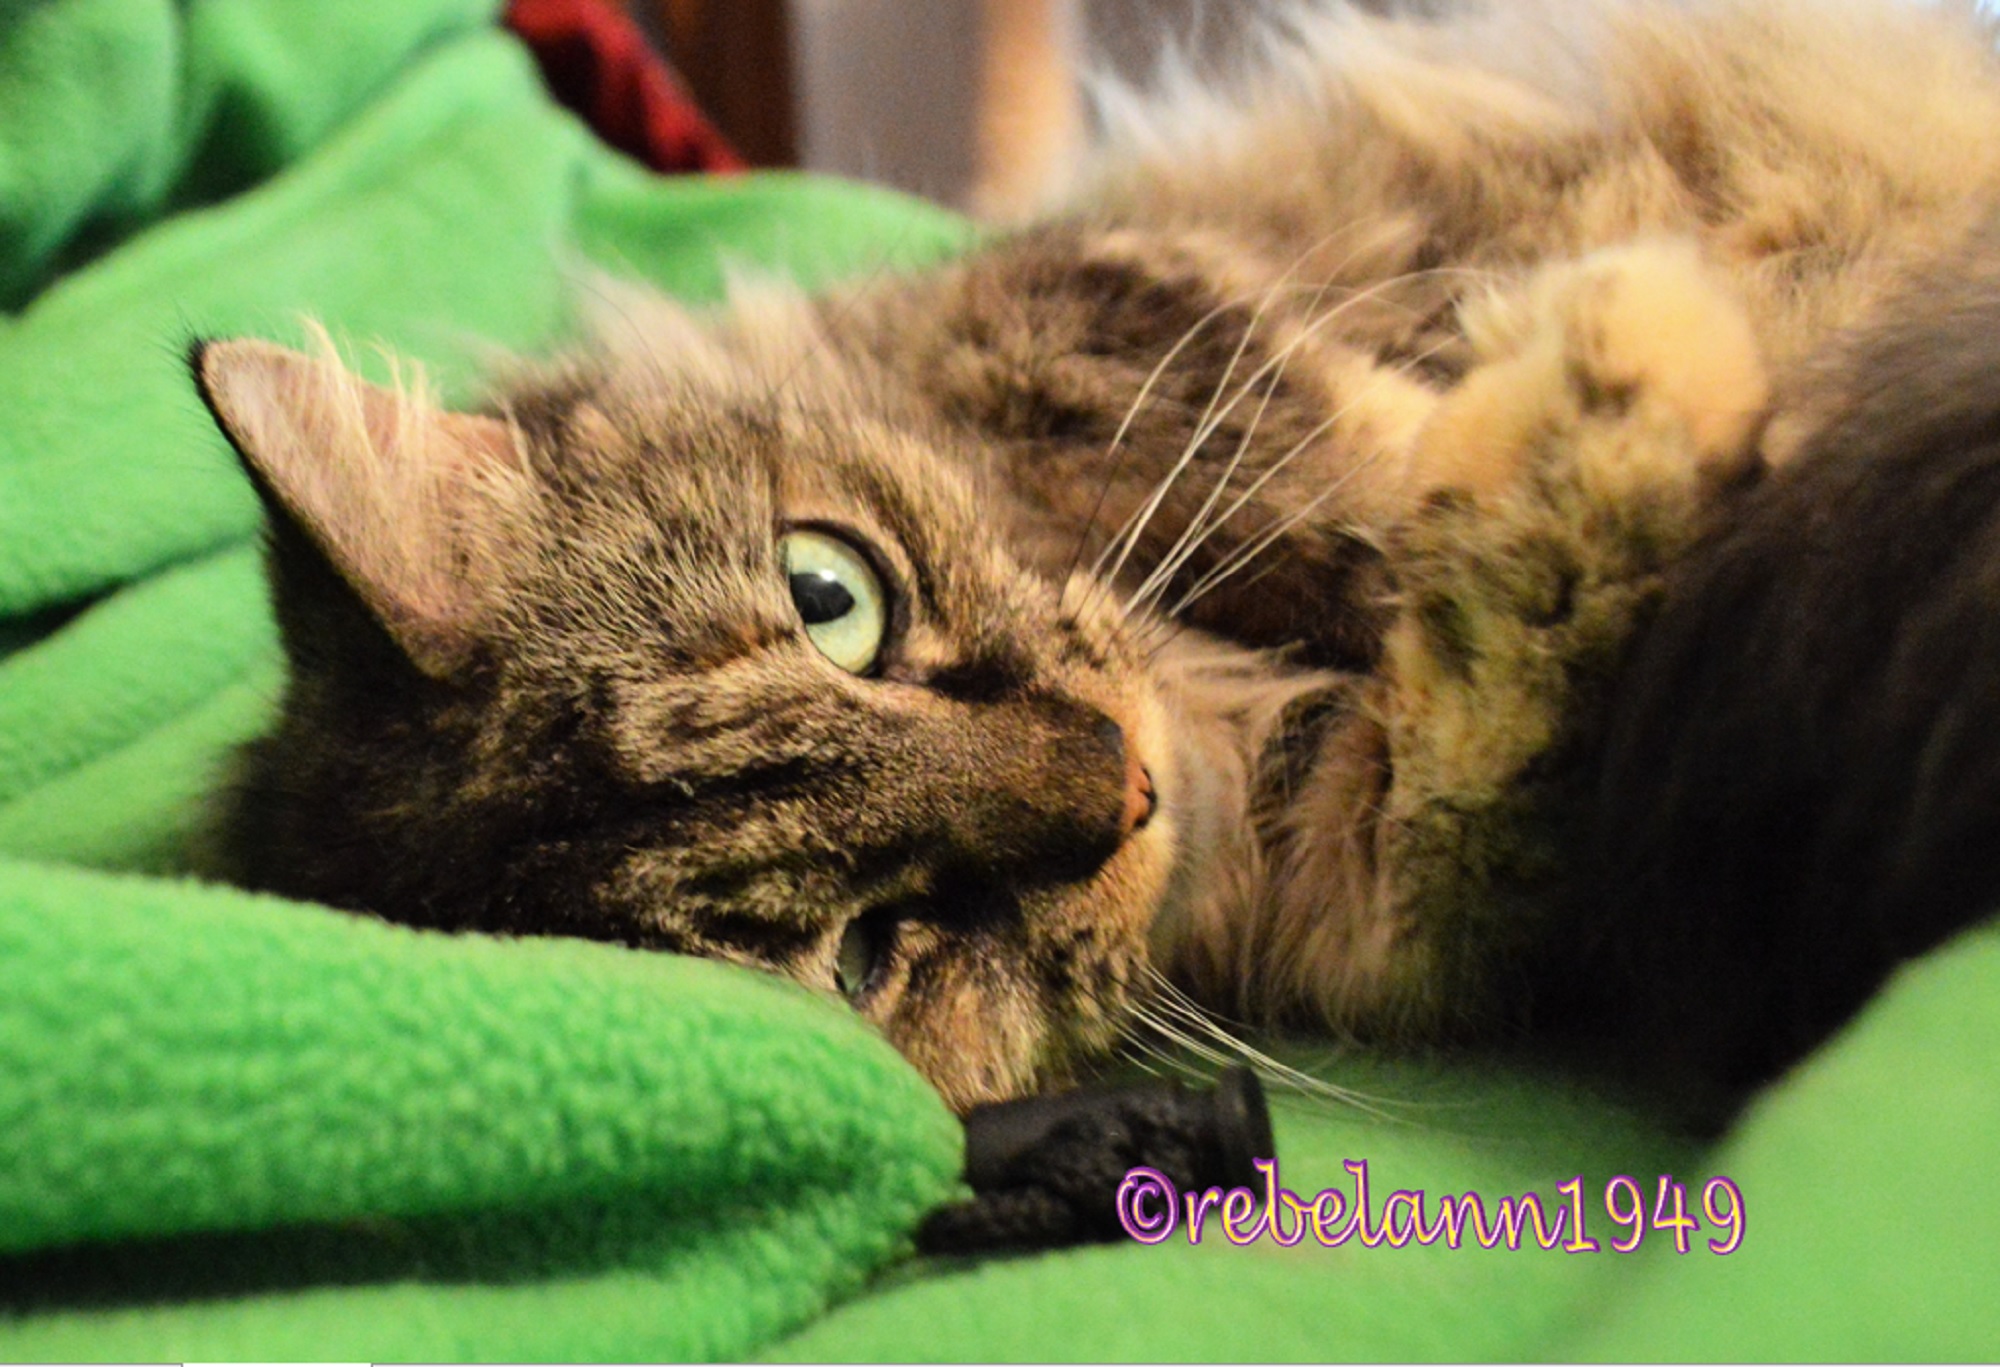 Boobear rolling around in a green blanket which matches her eyes. I can&#039;t remember the exact year I took this shot. 